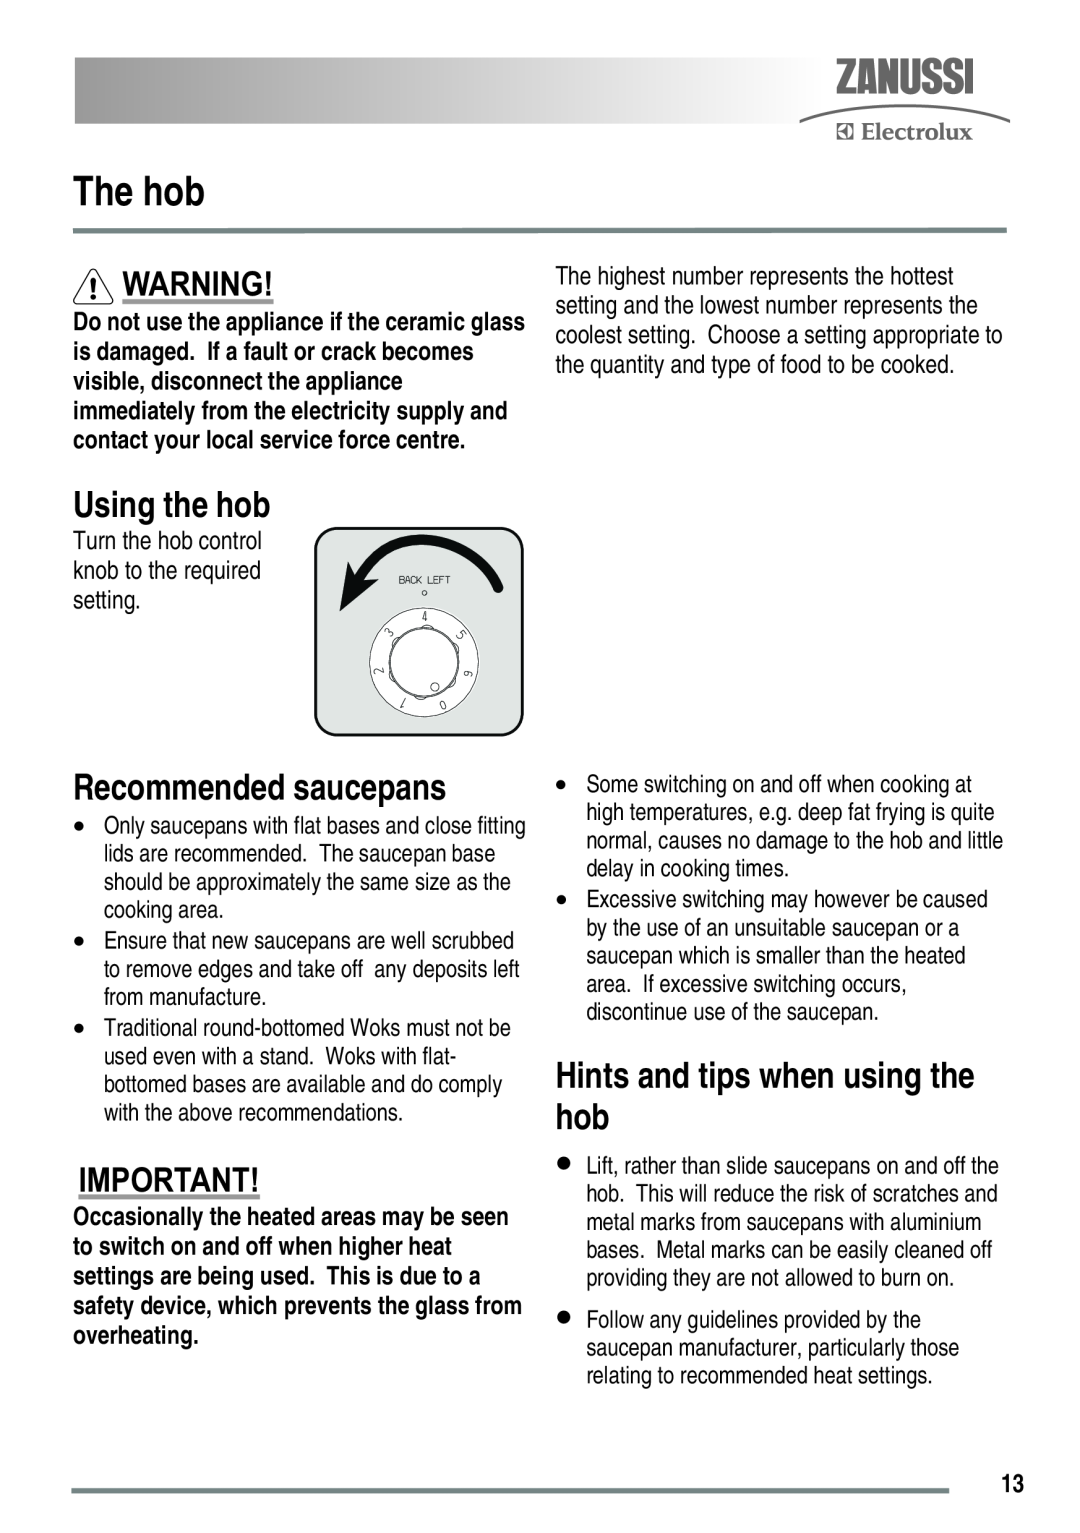 Zanussi ZKC5030 user manual The hob, Using the hob, Recommended saucepans, Hints and tips when using the hob 